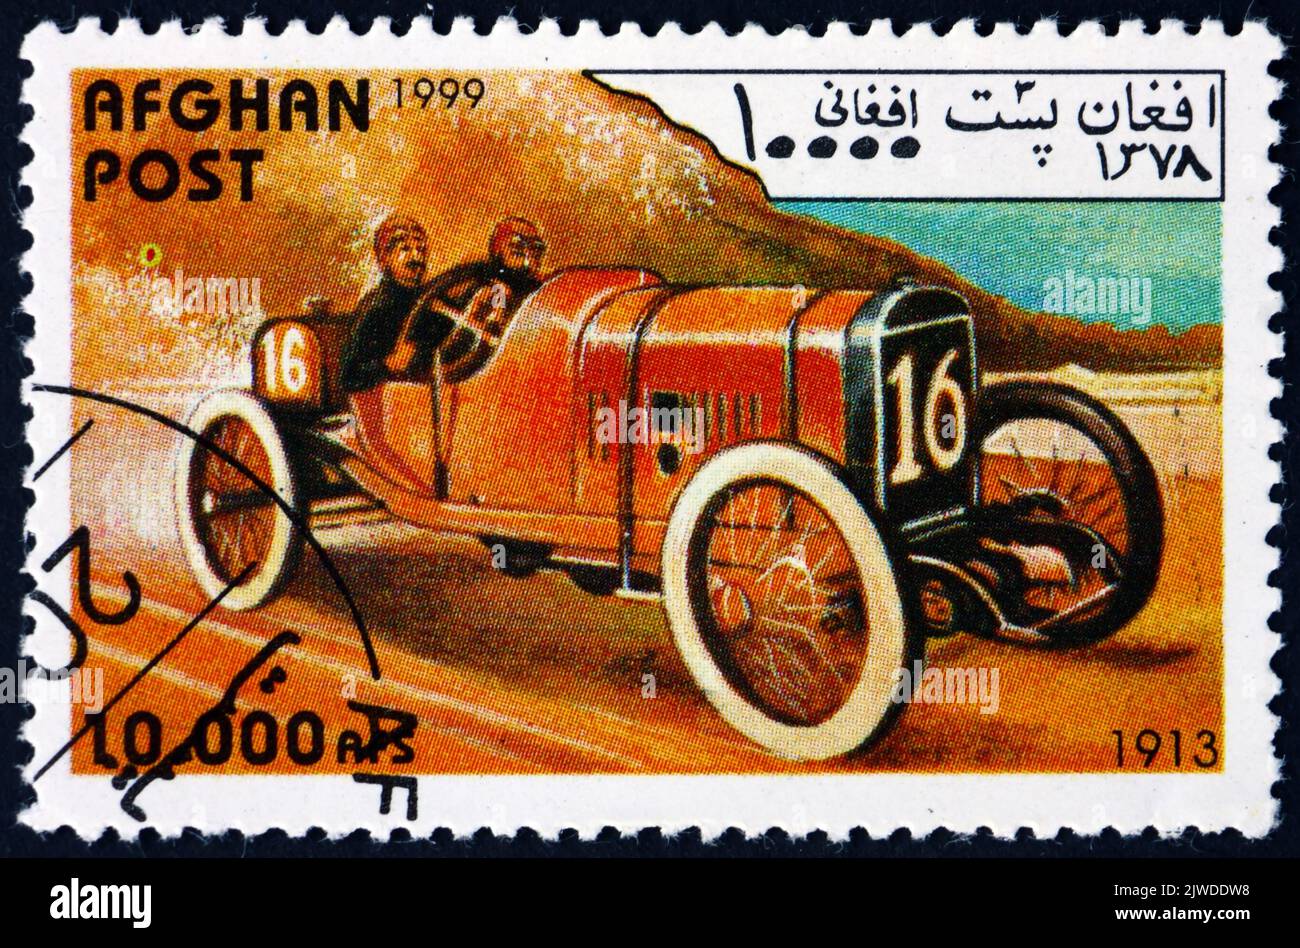 AFGHANISTAN - CIRCA 1999: a stamp printed in Afghanistan shows vintage racing car from 1913, circa 1999 Stock Photo